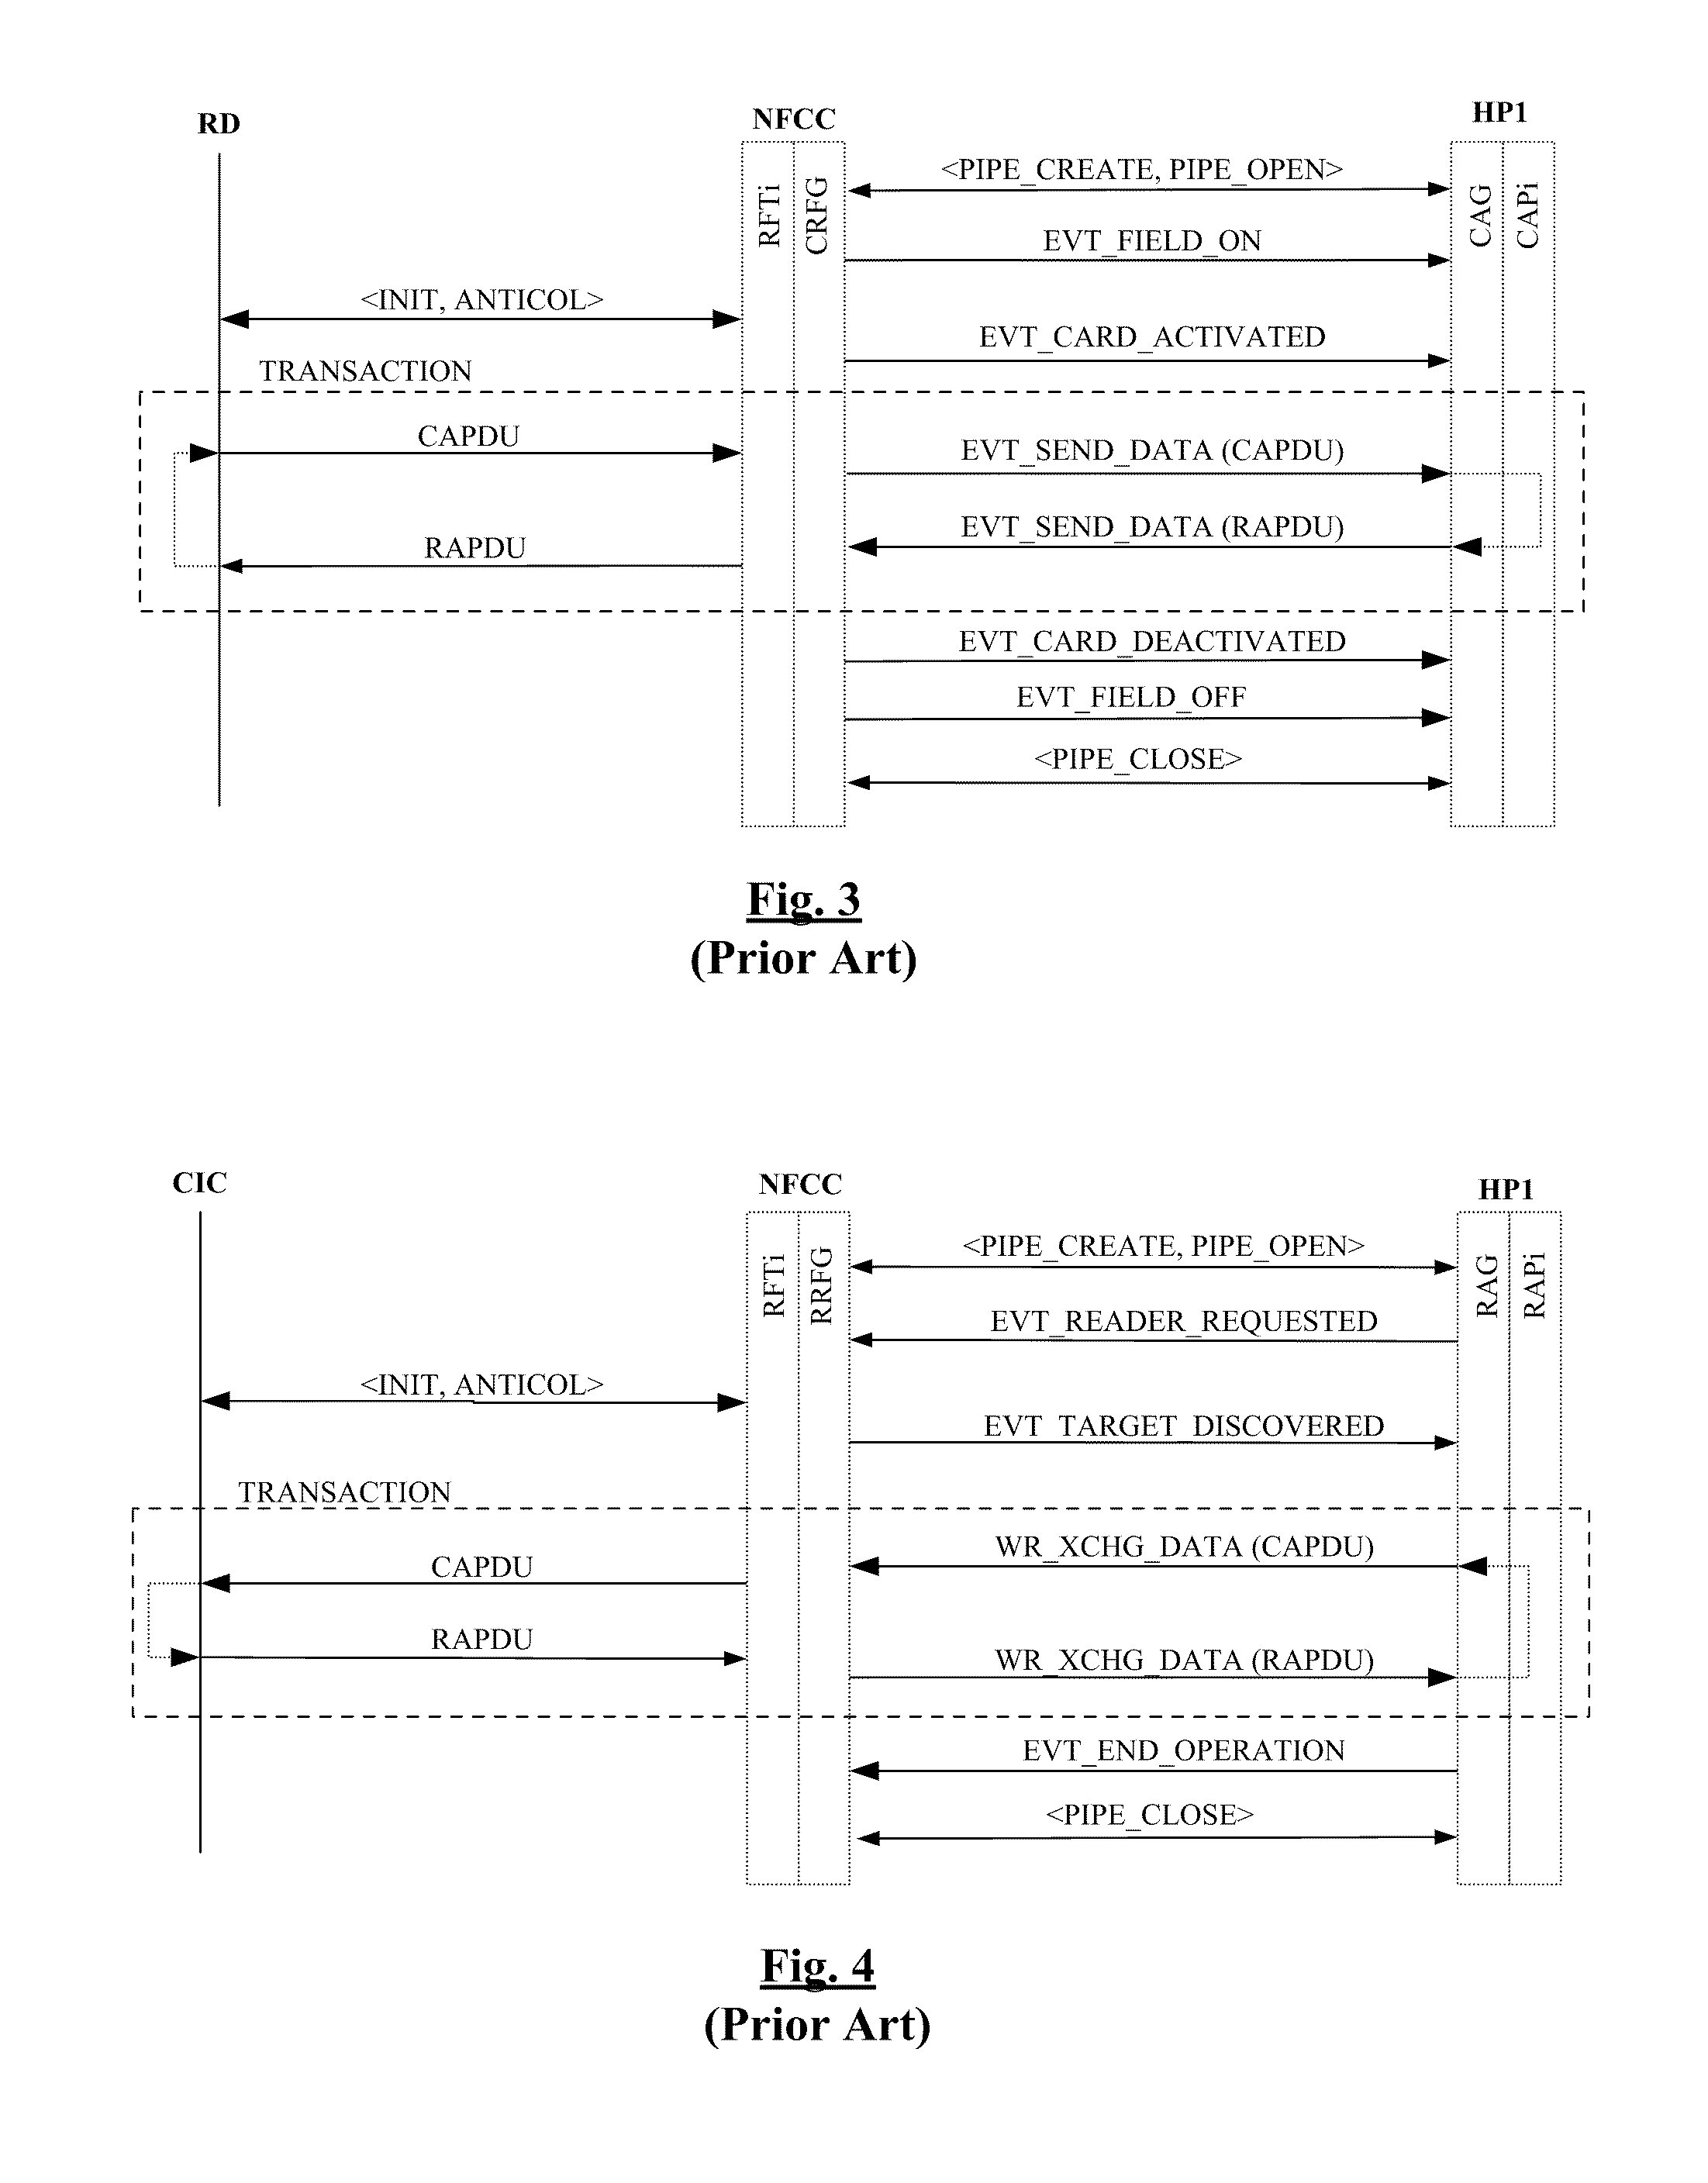 Method of conducting a transaction using an NFC device